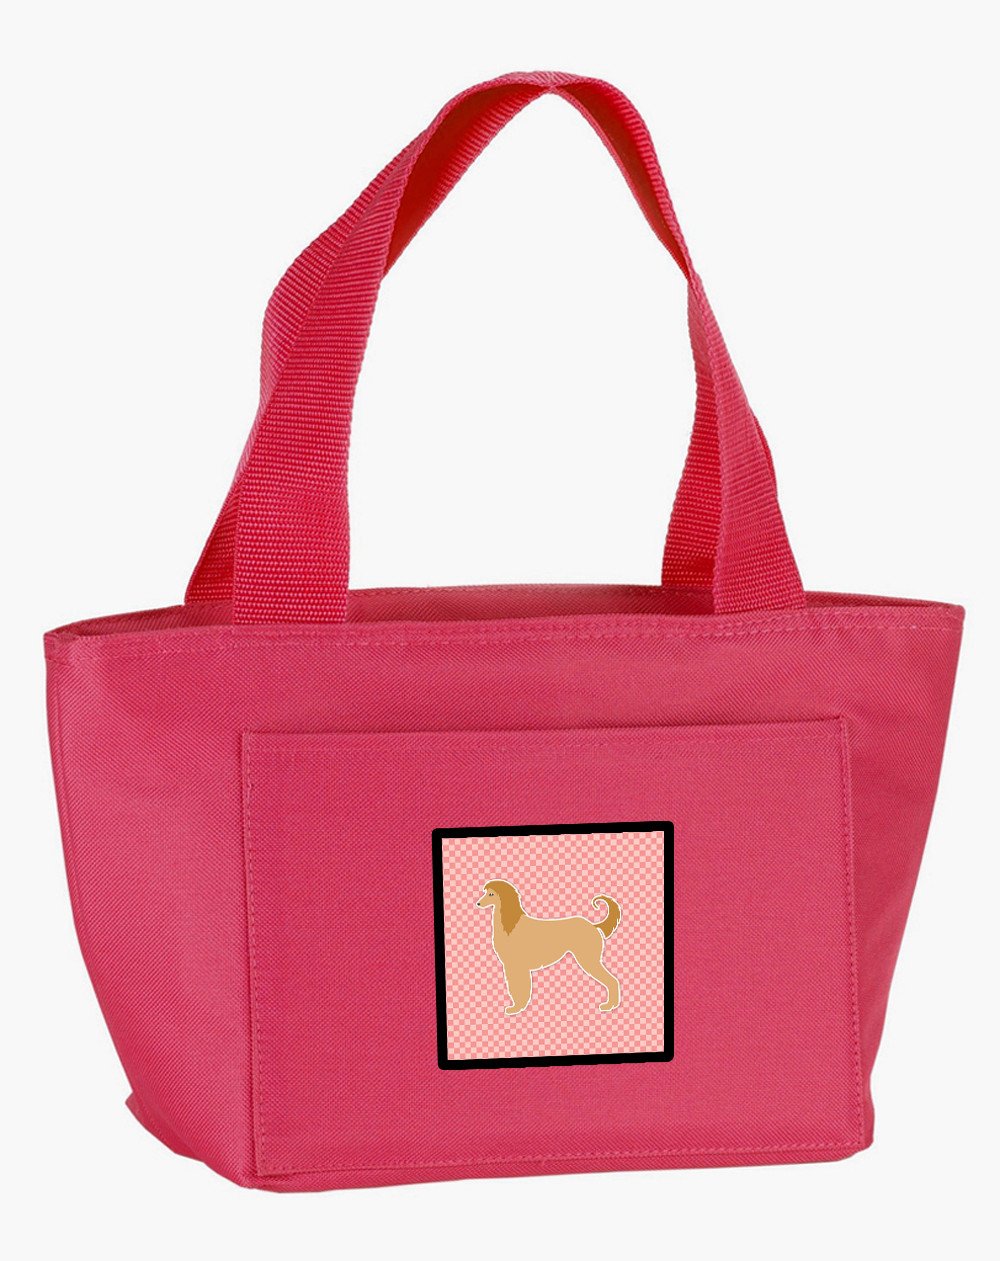 Afghan Hound Checkerboard Pink Lunch Bag BB3606PK-8808 by Caroline's Treasures